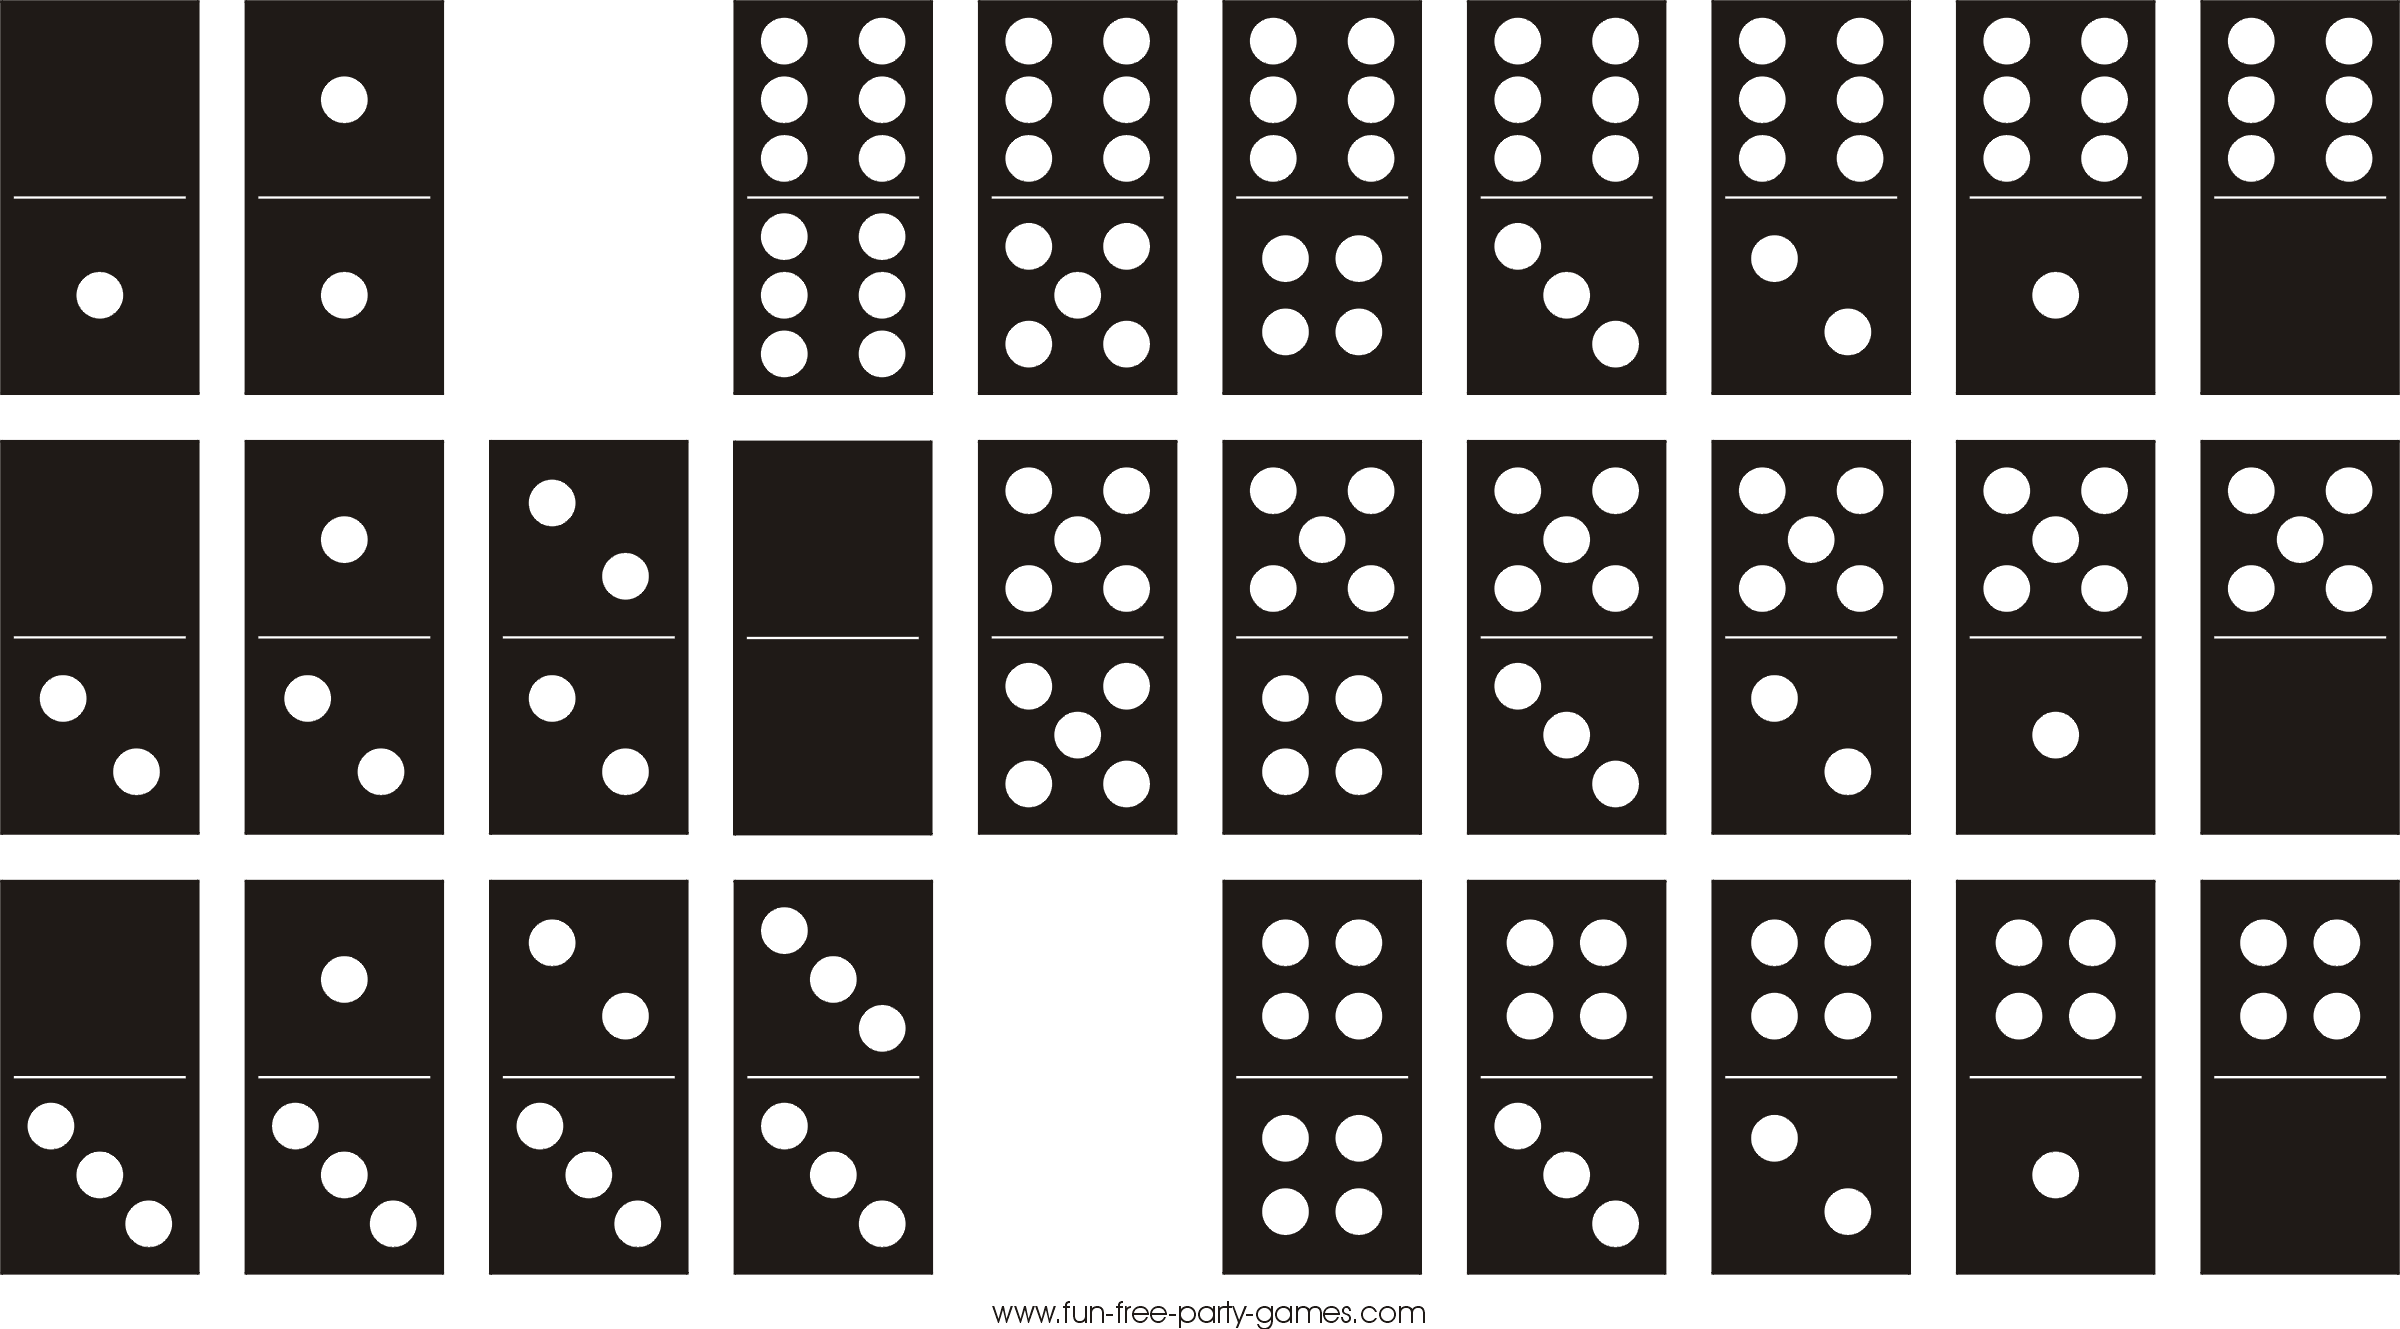 Domino tiles clipart - Clipground